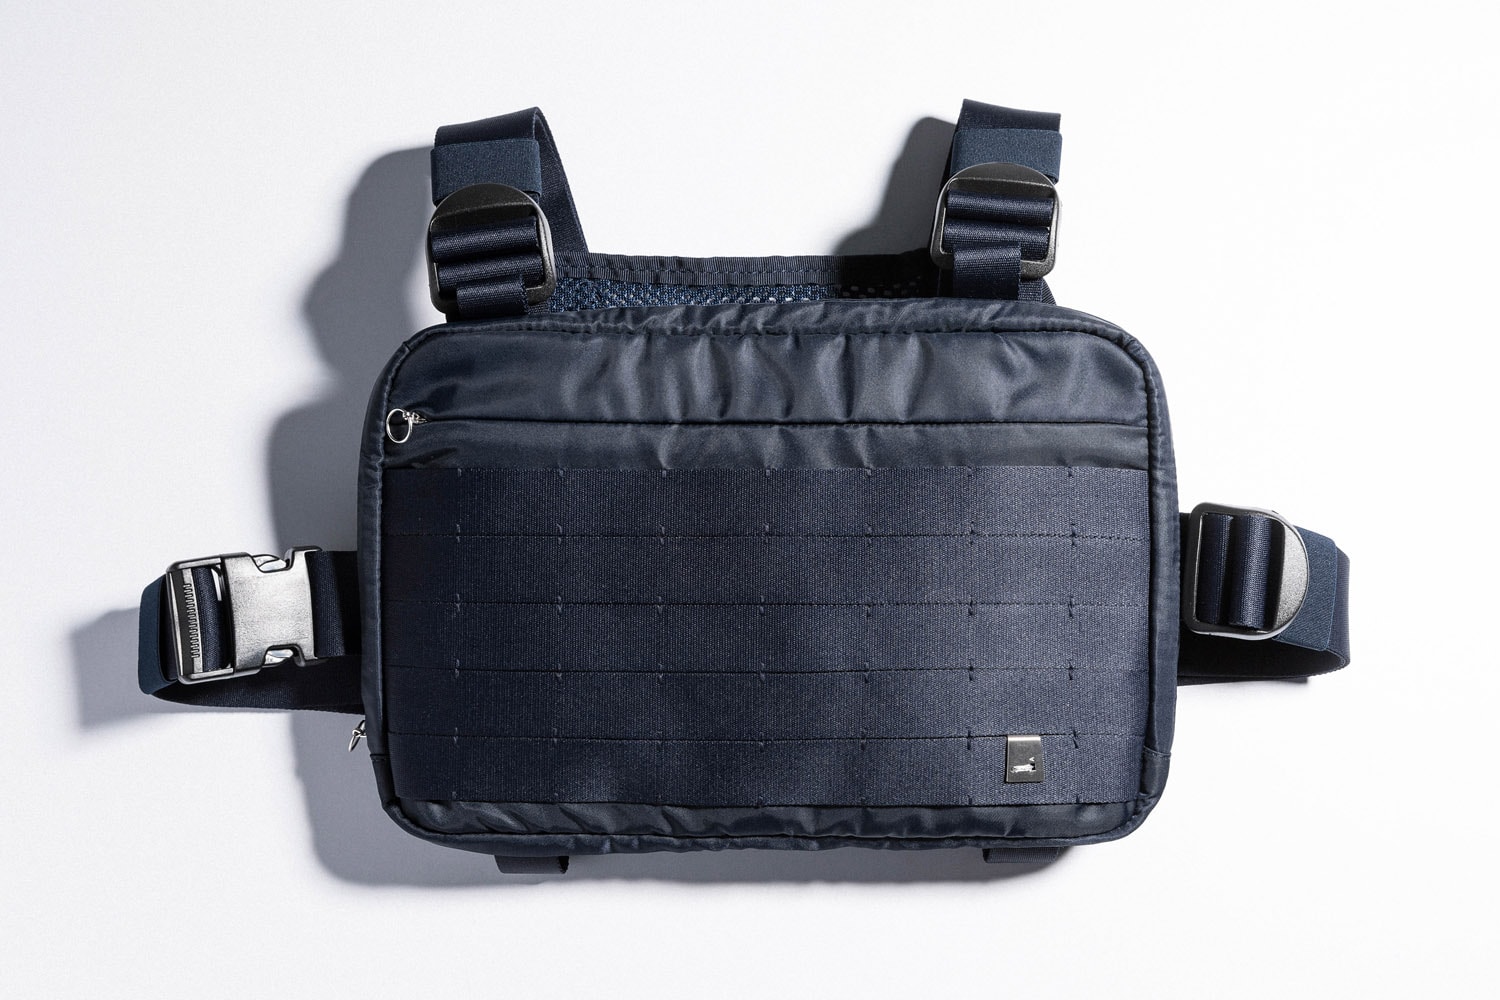 ALYX Matthew Williams HBX Chest Rig Bag Accessories Kanye West A$AP Rocky buy how to cop release details information